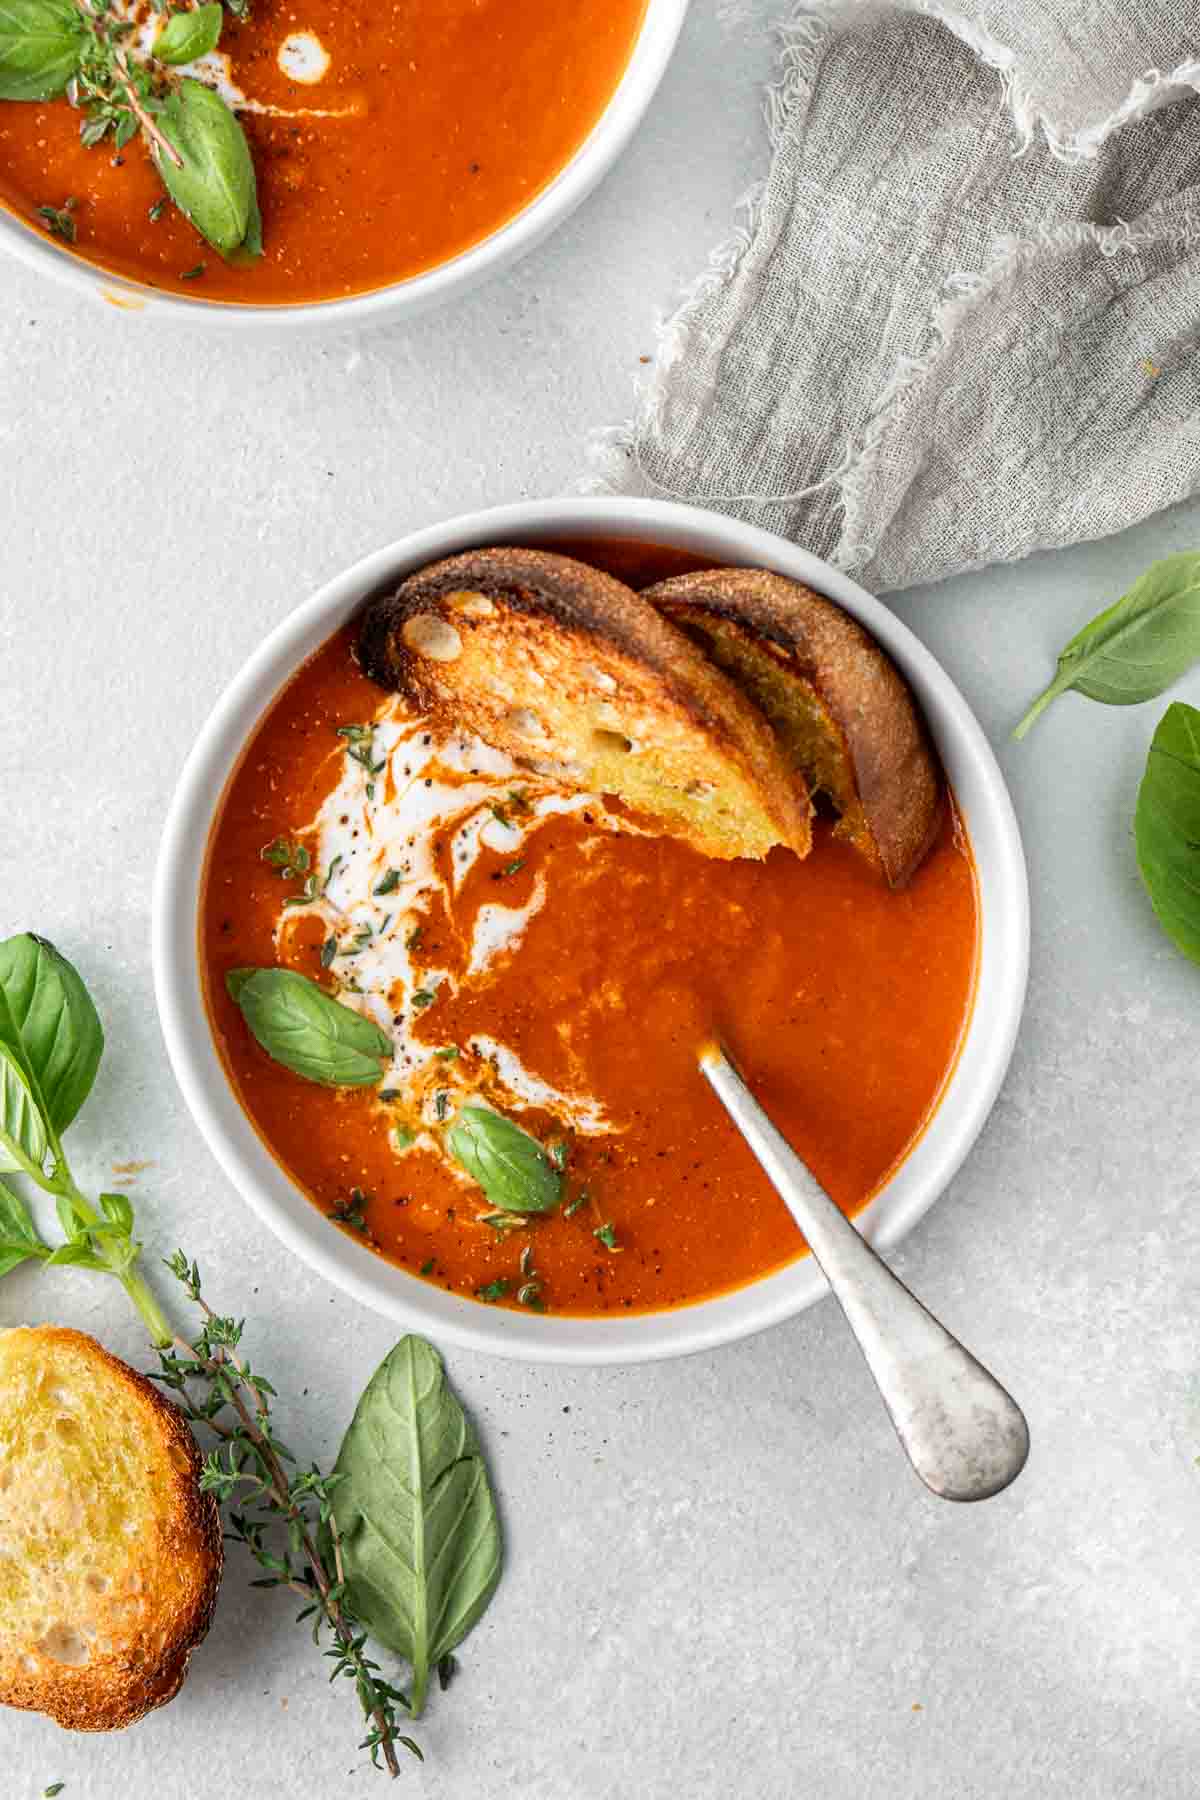 Overhead shot of a bowl of tomato soup with toasted bread and a spoon garnished with herbs.